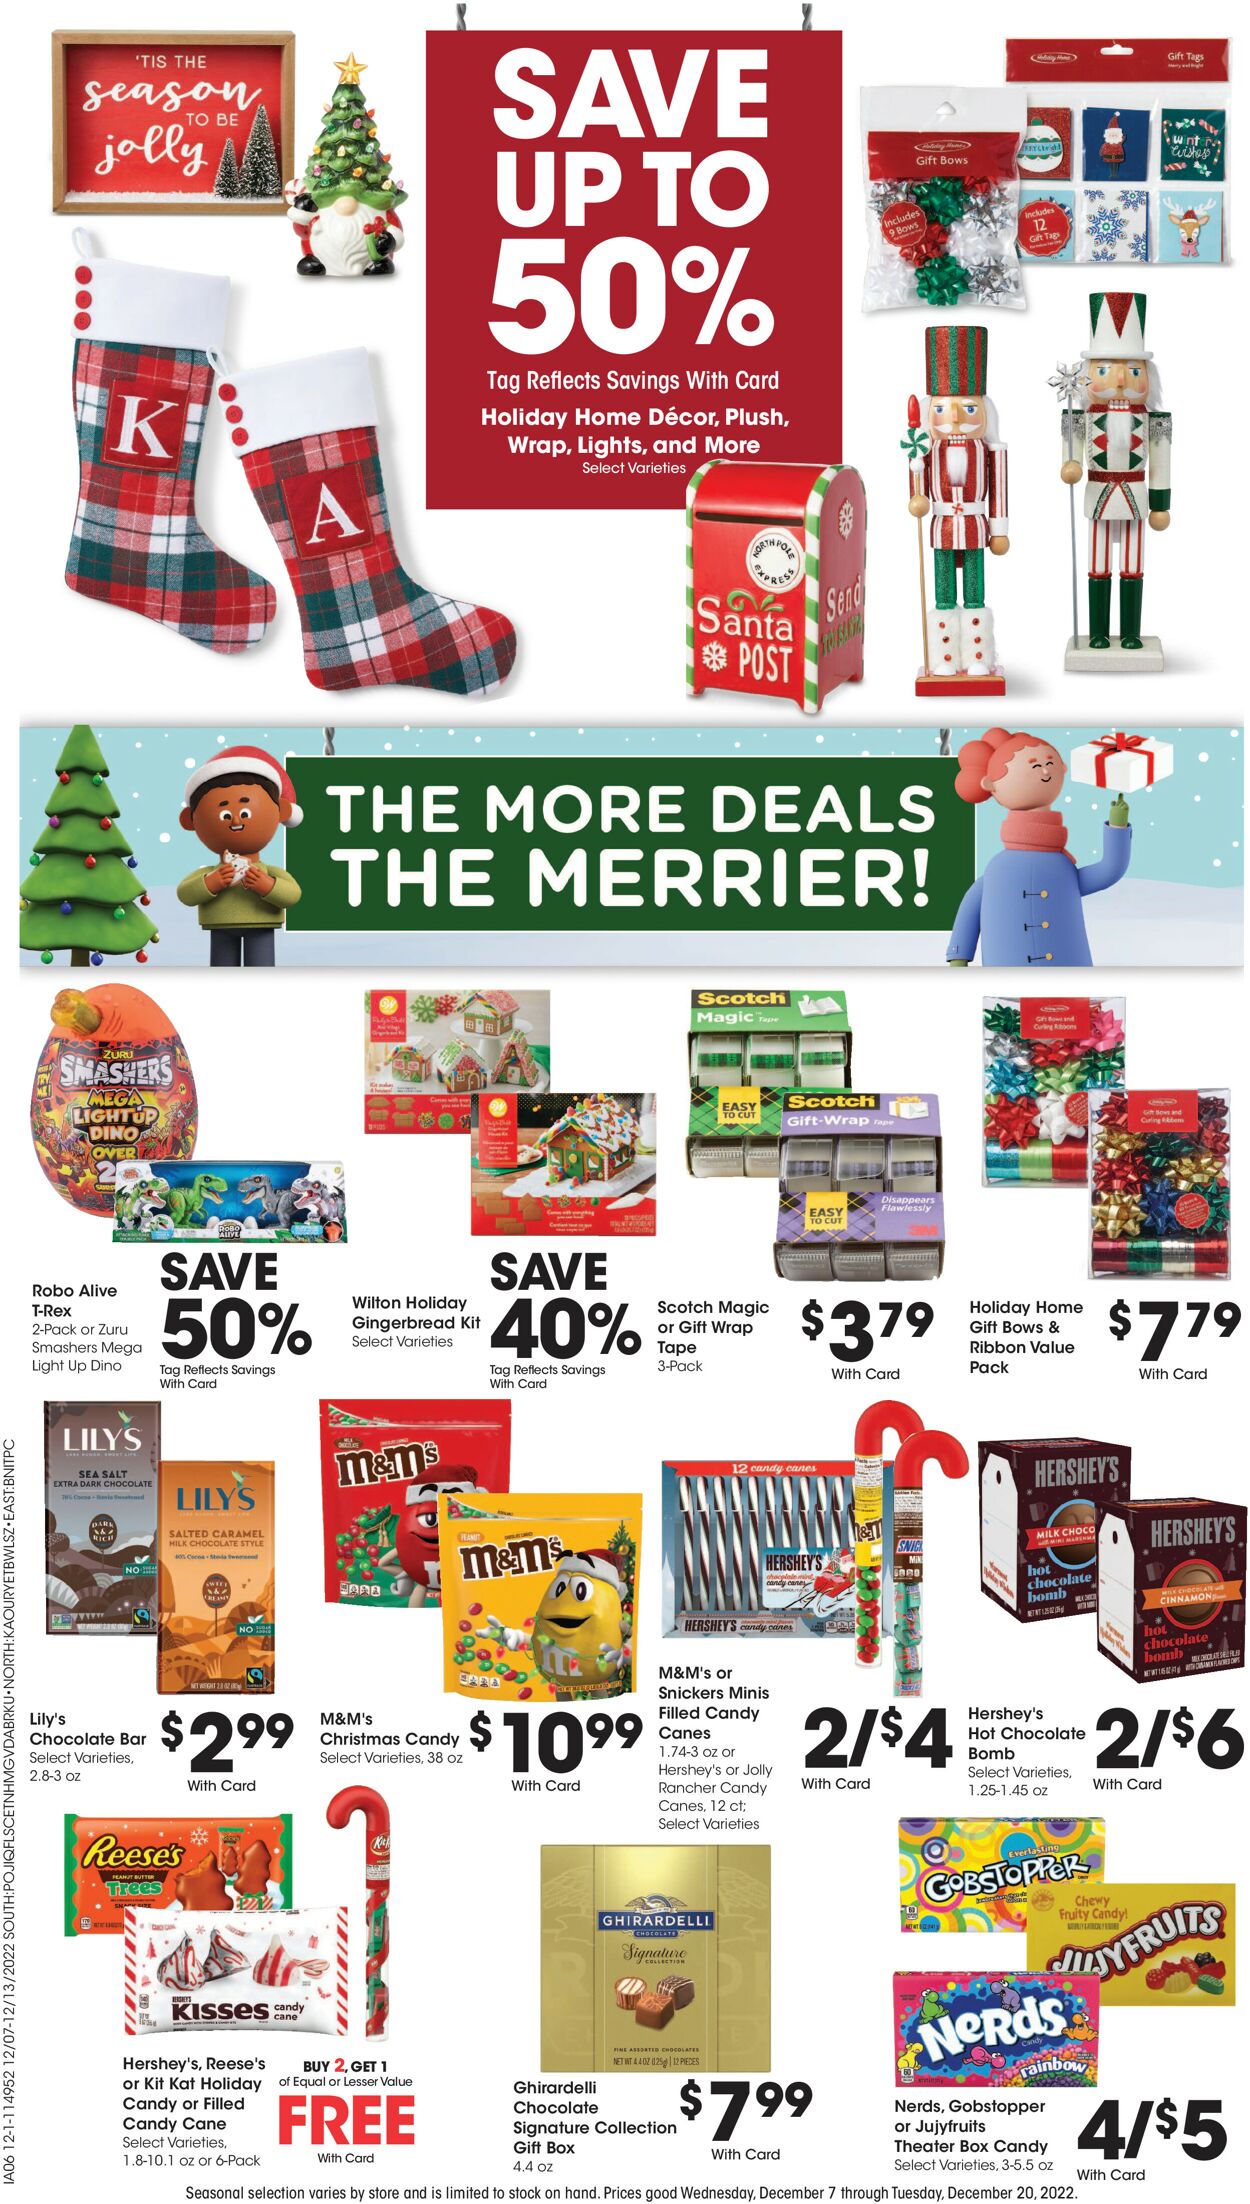 Fred Meyer Weekly Ad Circular - valid 12/14-12/20/2022 (Page 12)